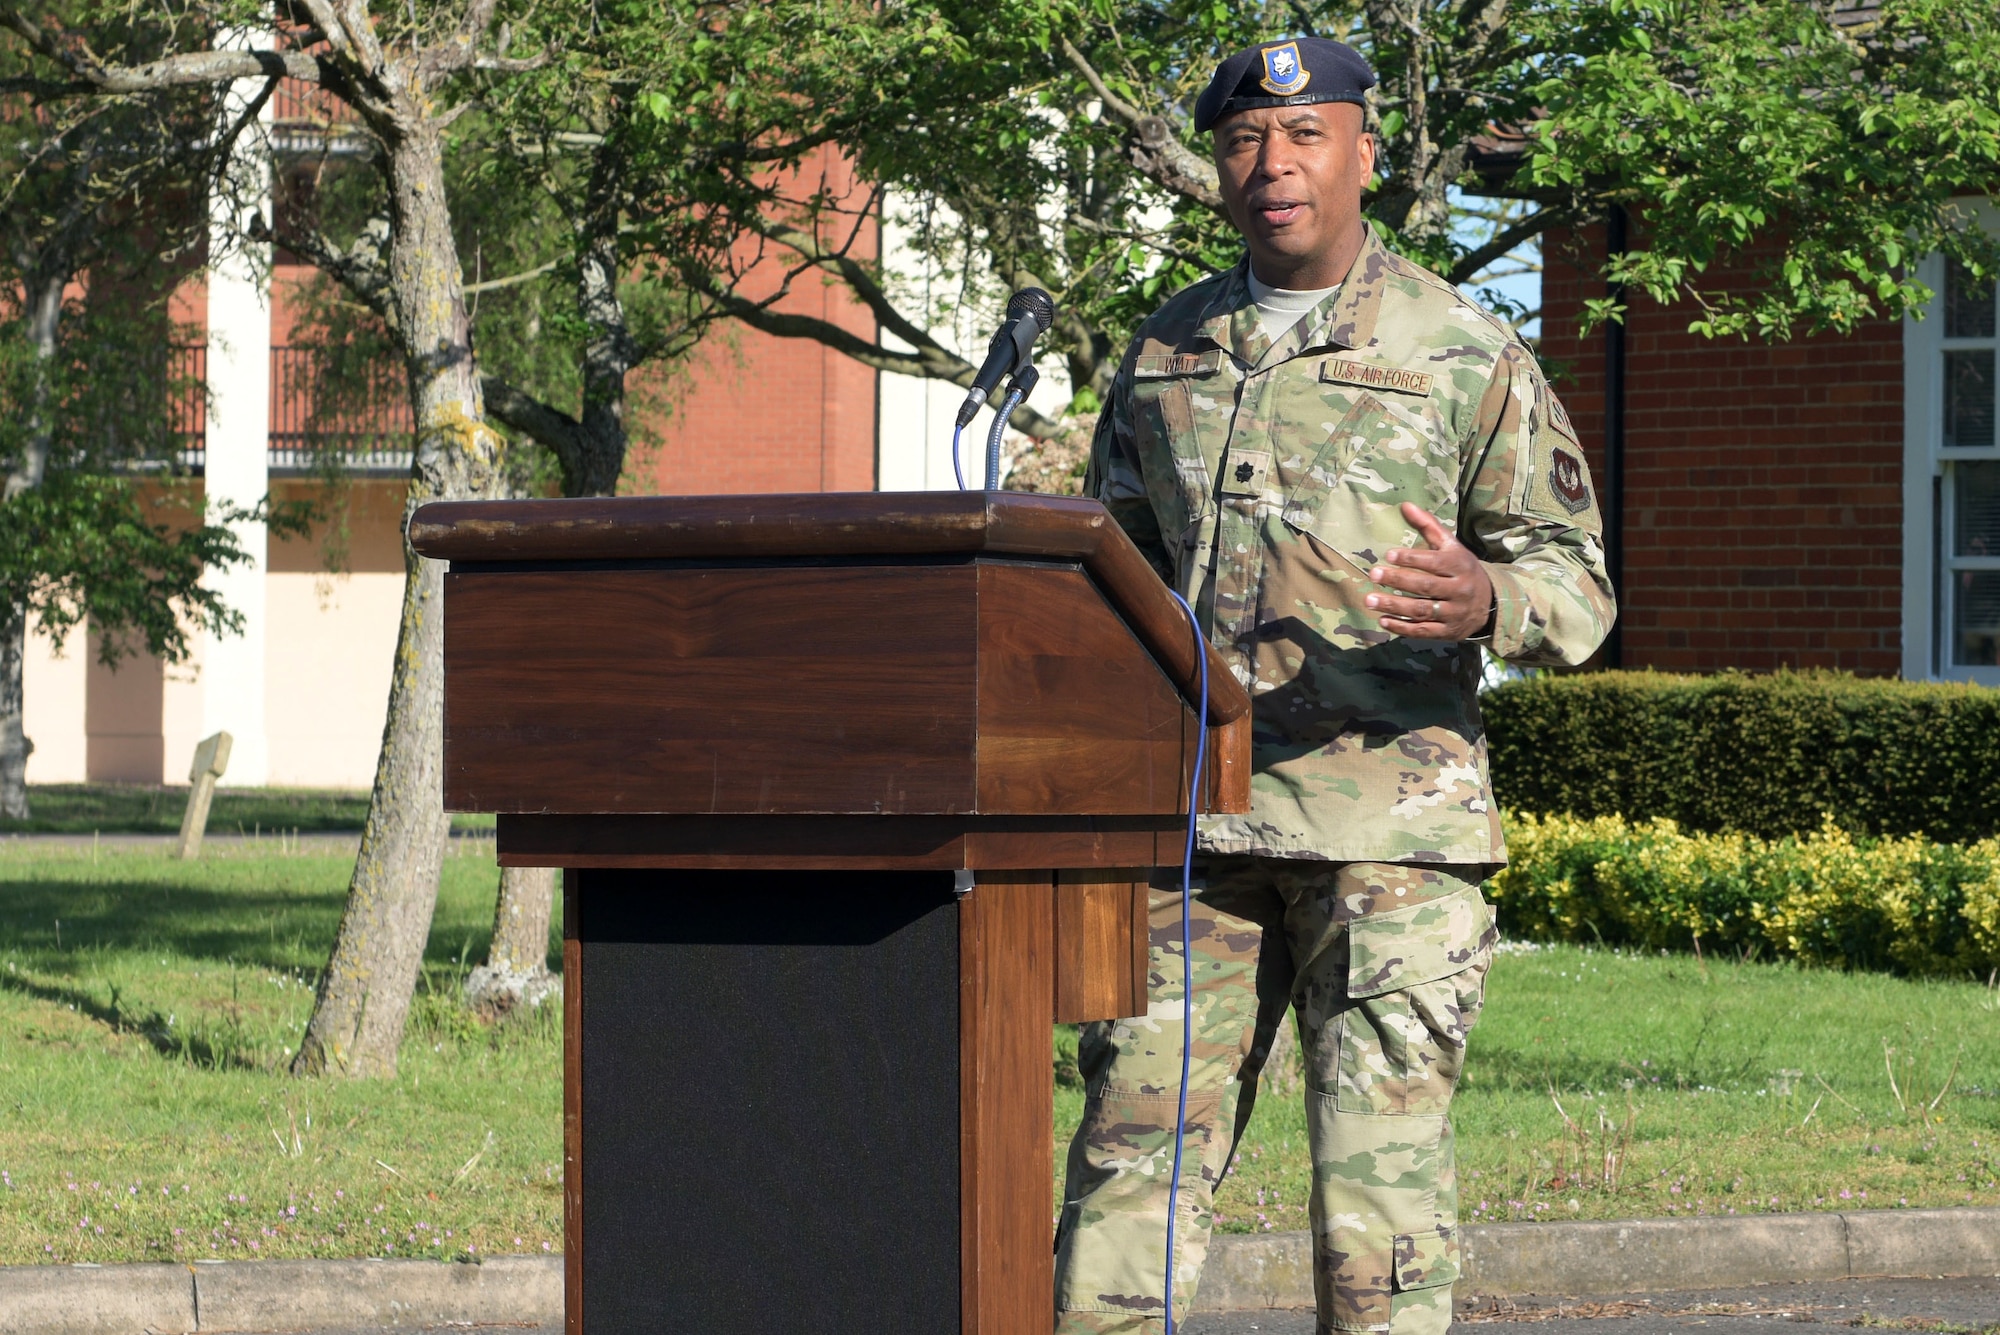 U.S. Air Force Lt. Col. Lawrence Wyatt, 100th Security Forces Squadron commander, speaks at the opening ceremony for National Police Week at RAF Mildenhall, England, May 13, 2019. The purpose of Police Week is to honor law enforcement members who have made the ultimate sacrifice in the line of duty. (U.S. Air Force photo by Senior Airman Benjamin Cooper)